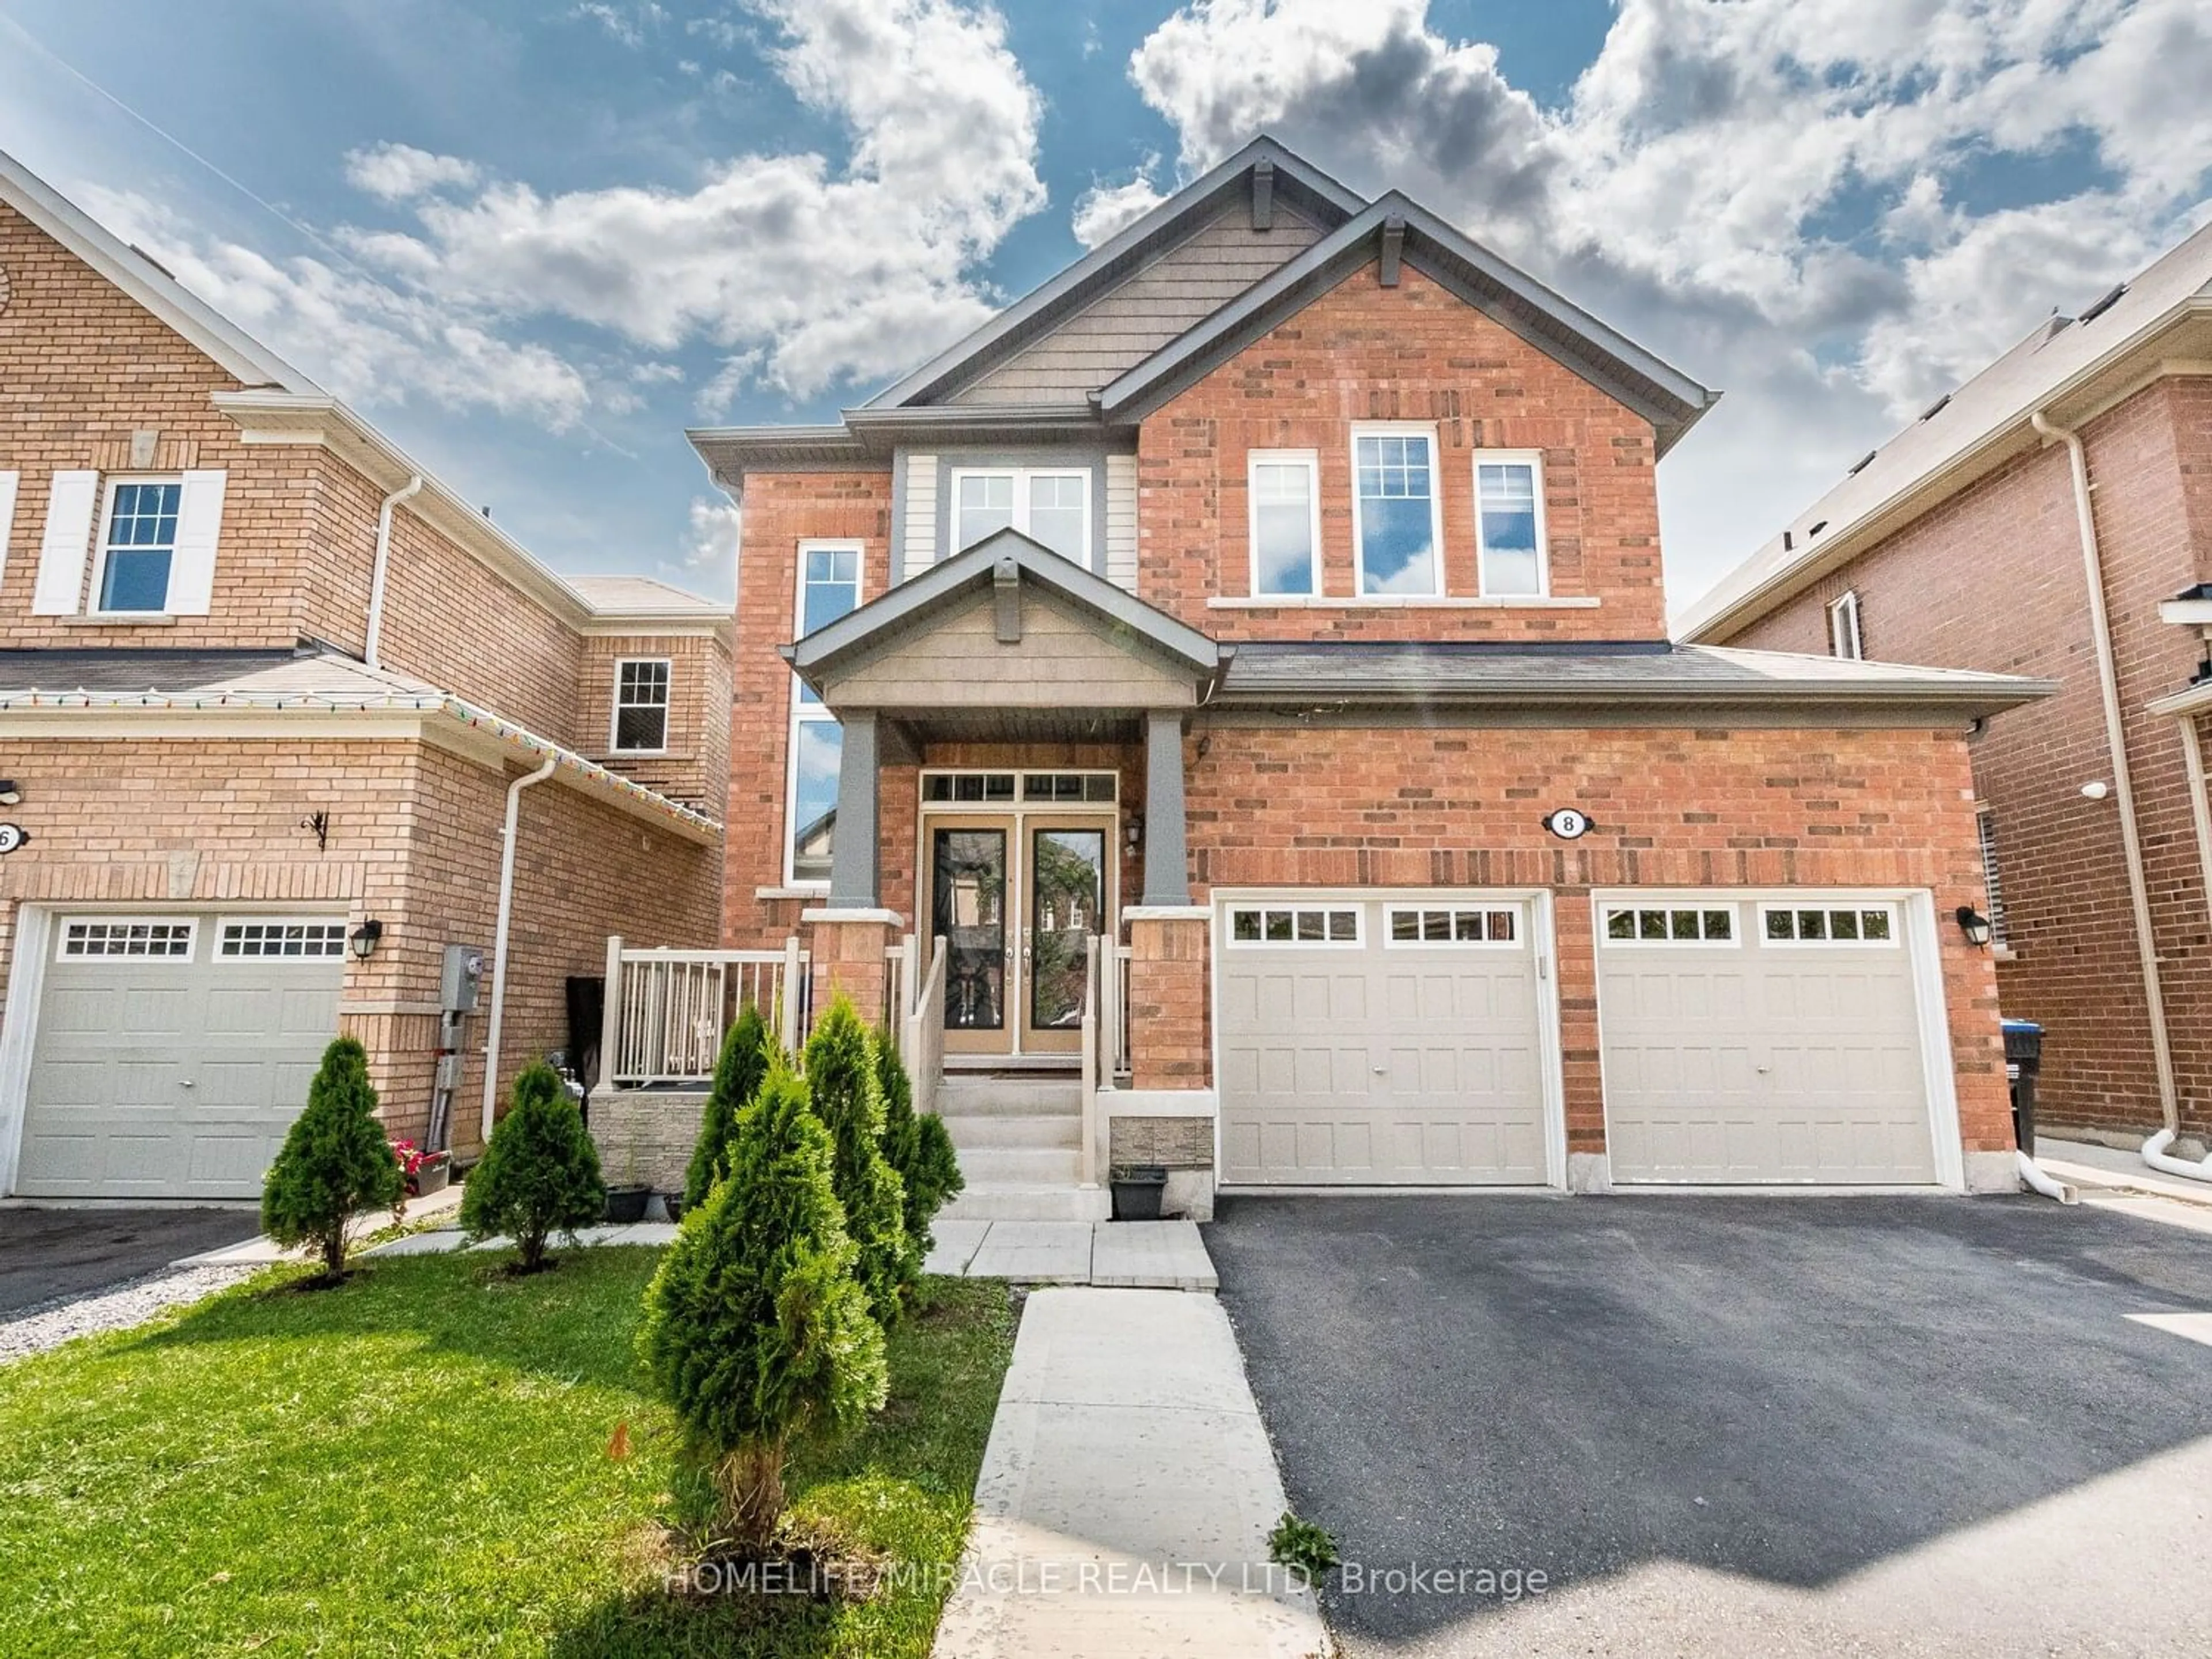 Home with brick exterior material for 8 Feeder St, Brampton Ontario L7A 4T8